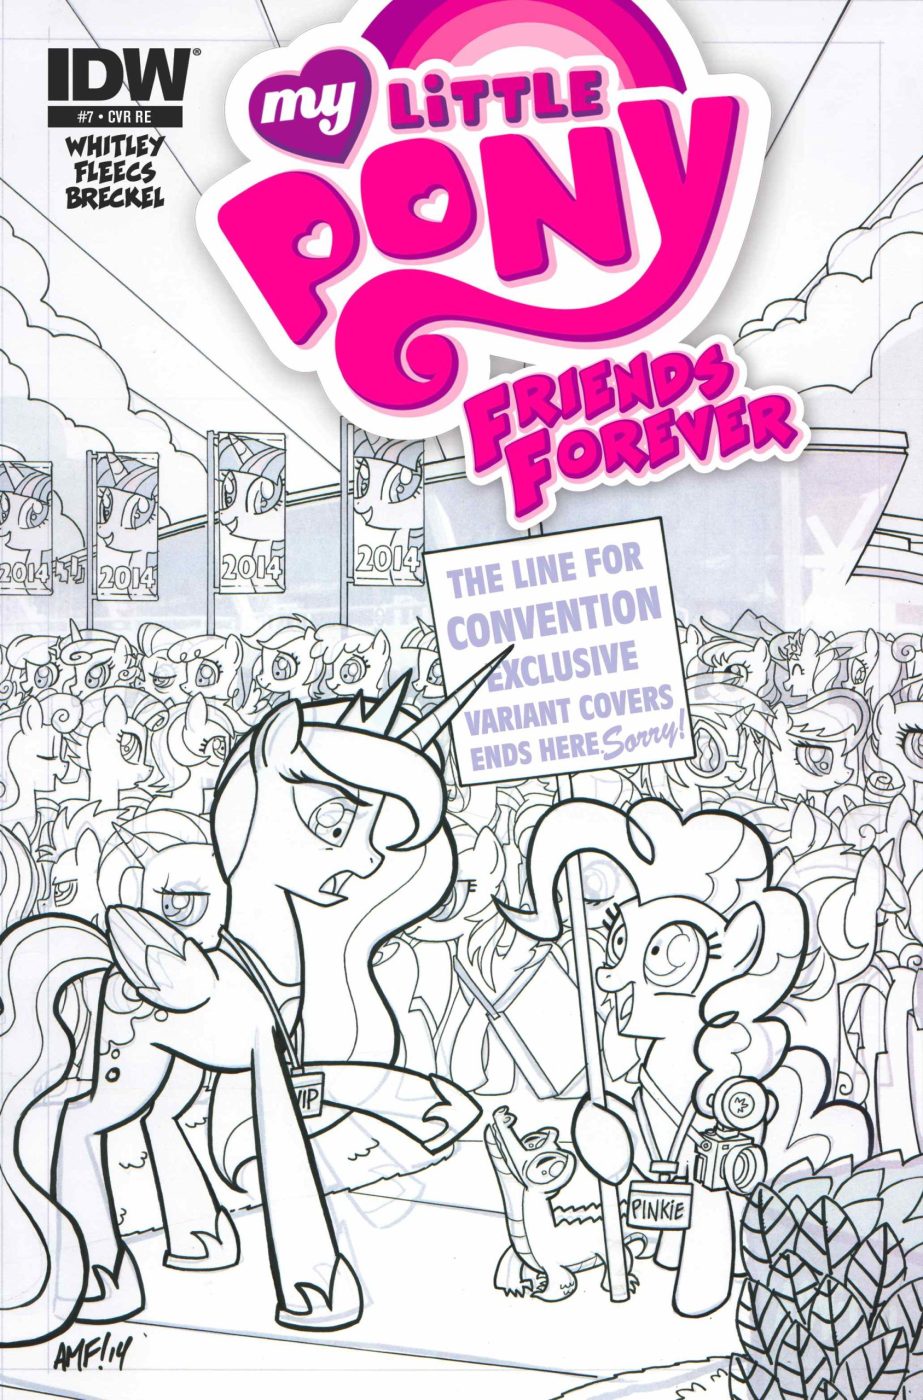 My Little Pony Friends Forever #7 (OFFICIAL BRONY CON EDITION – Limited Edition Micro Print Cover)